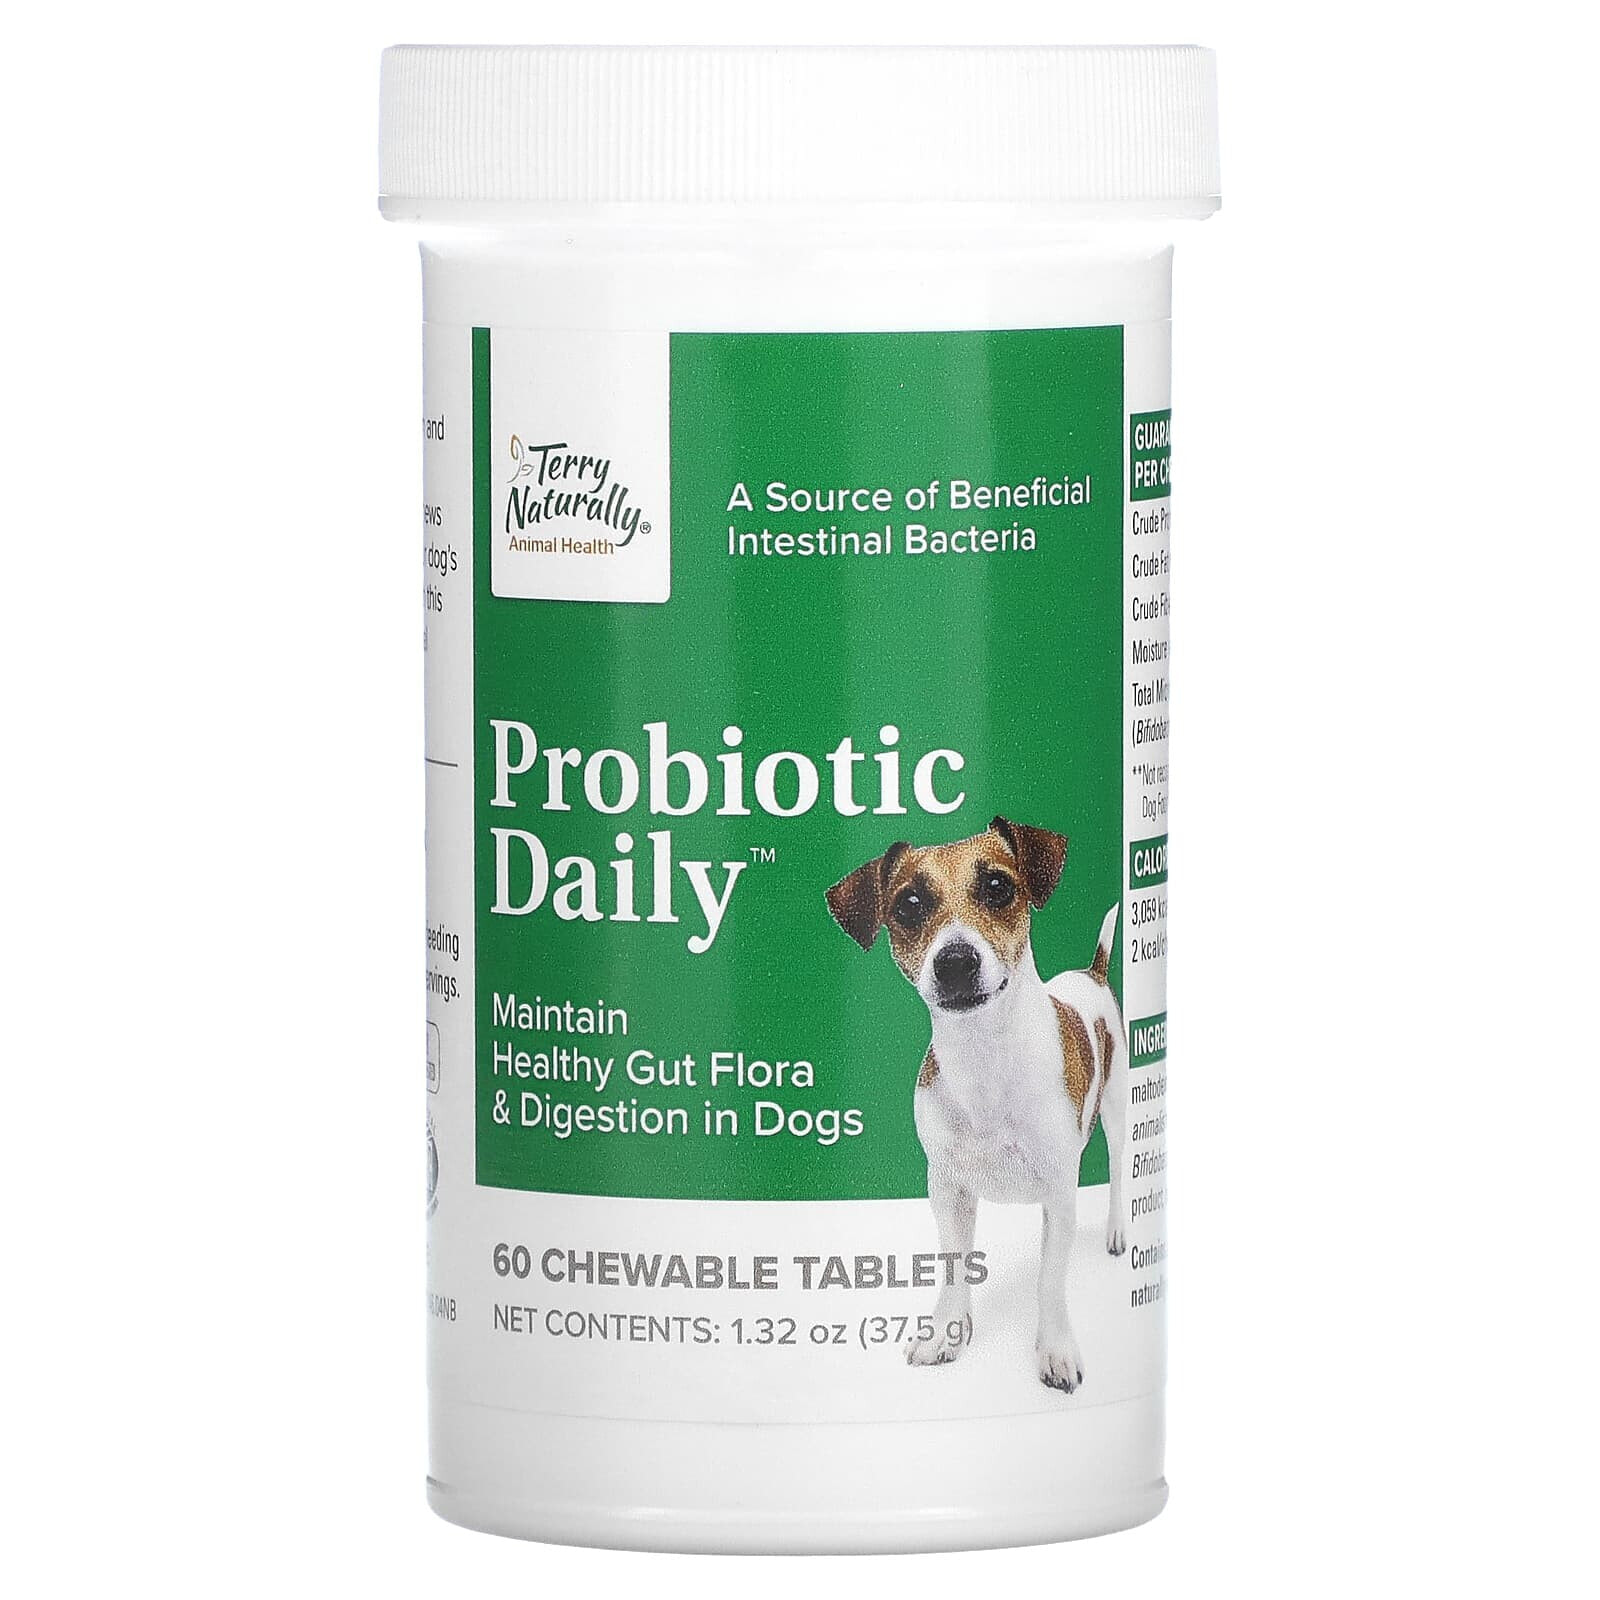 Probiotic Daily, For Dogs, 60 Chewable Tablets, 1.32 oz (37.5 g)